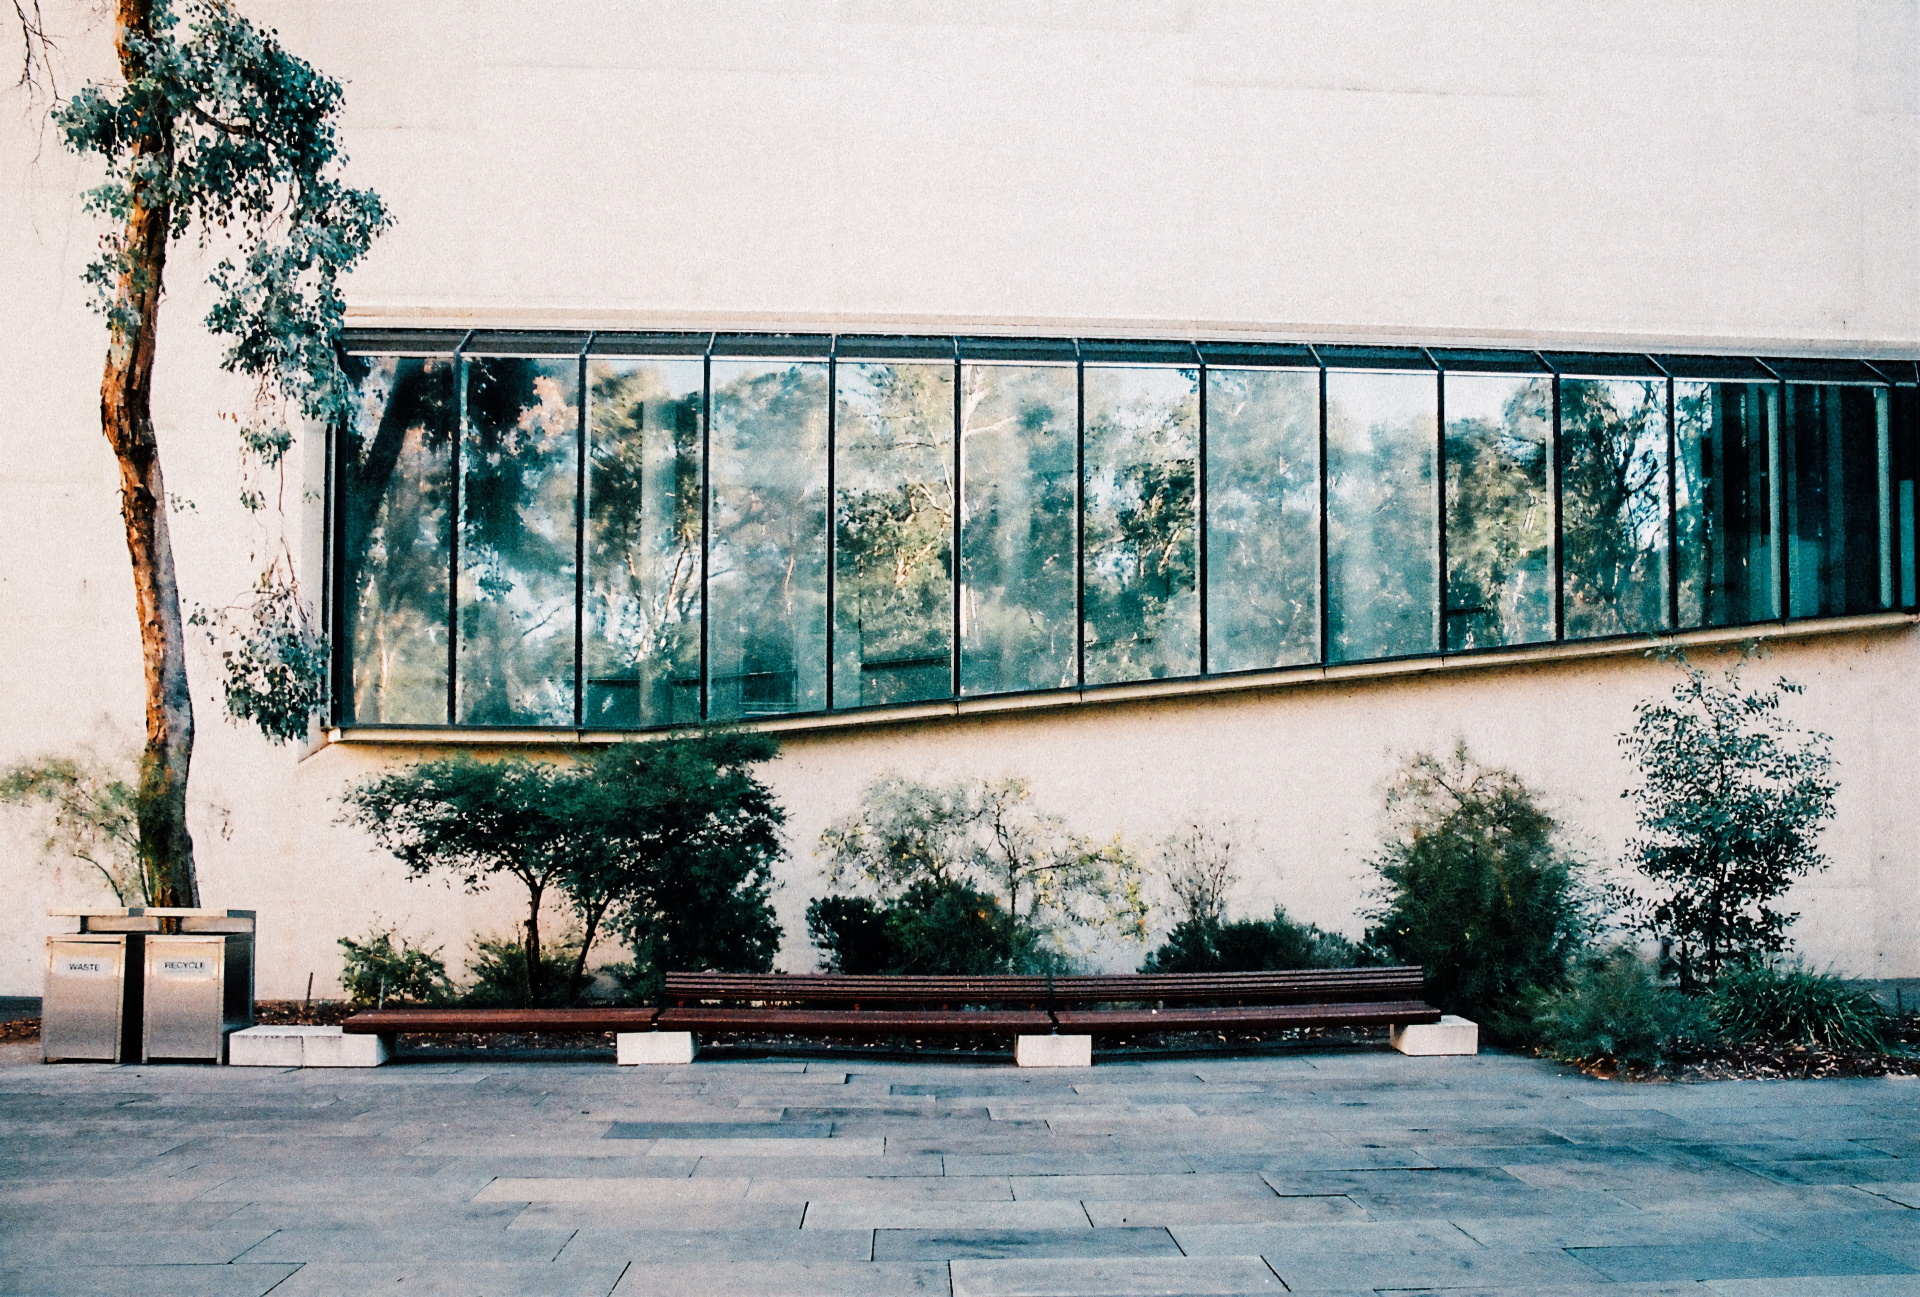 Image description – a photo showing a detail of the outside of the National Gallery of Australia building. A long, paneled window reflecting gum trees on a pale pink wall, with a bench, bushes and paved area in the foreground.